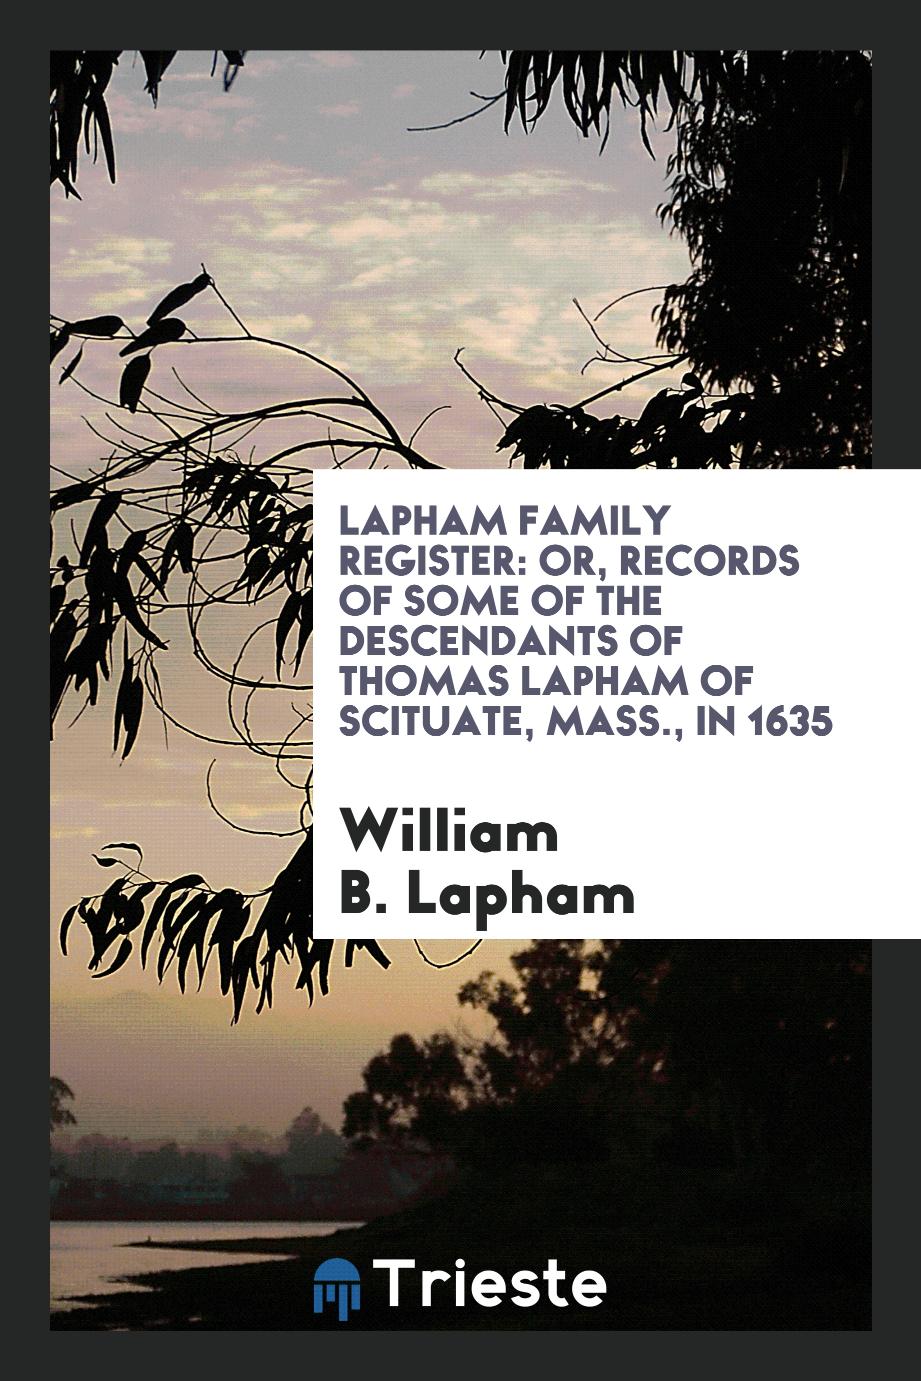 Lapham Family Register: Or, Records of Some of the Descendants of Thomas Lapham of Scituate, Mass., in 1635